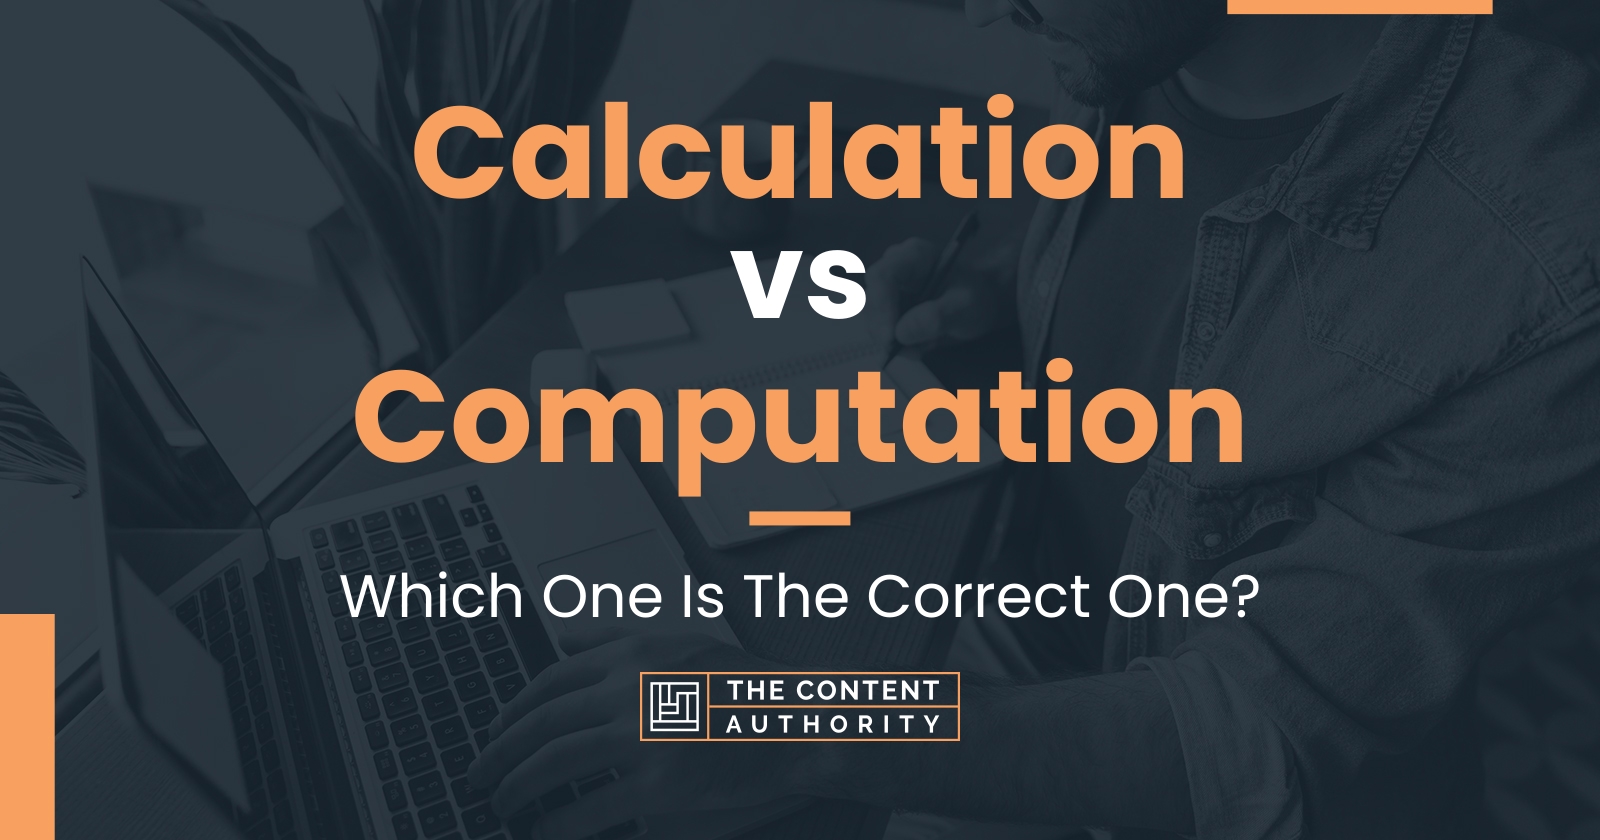 Calculation vs Computation: Which One Is The Correct One?